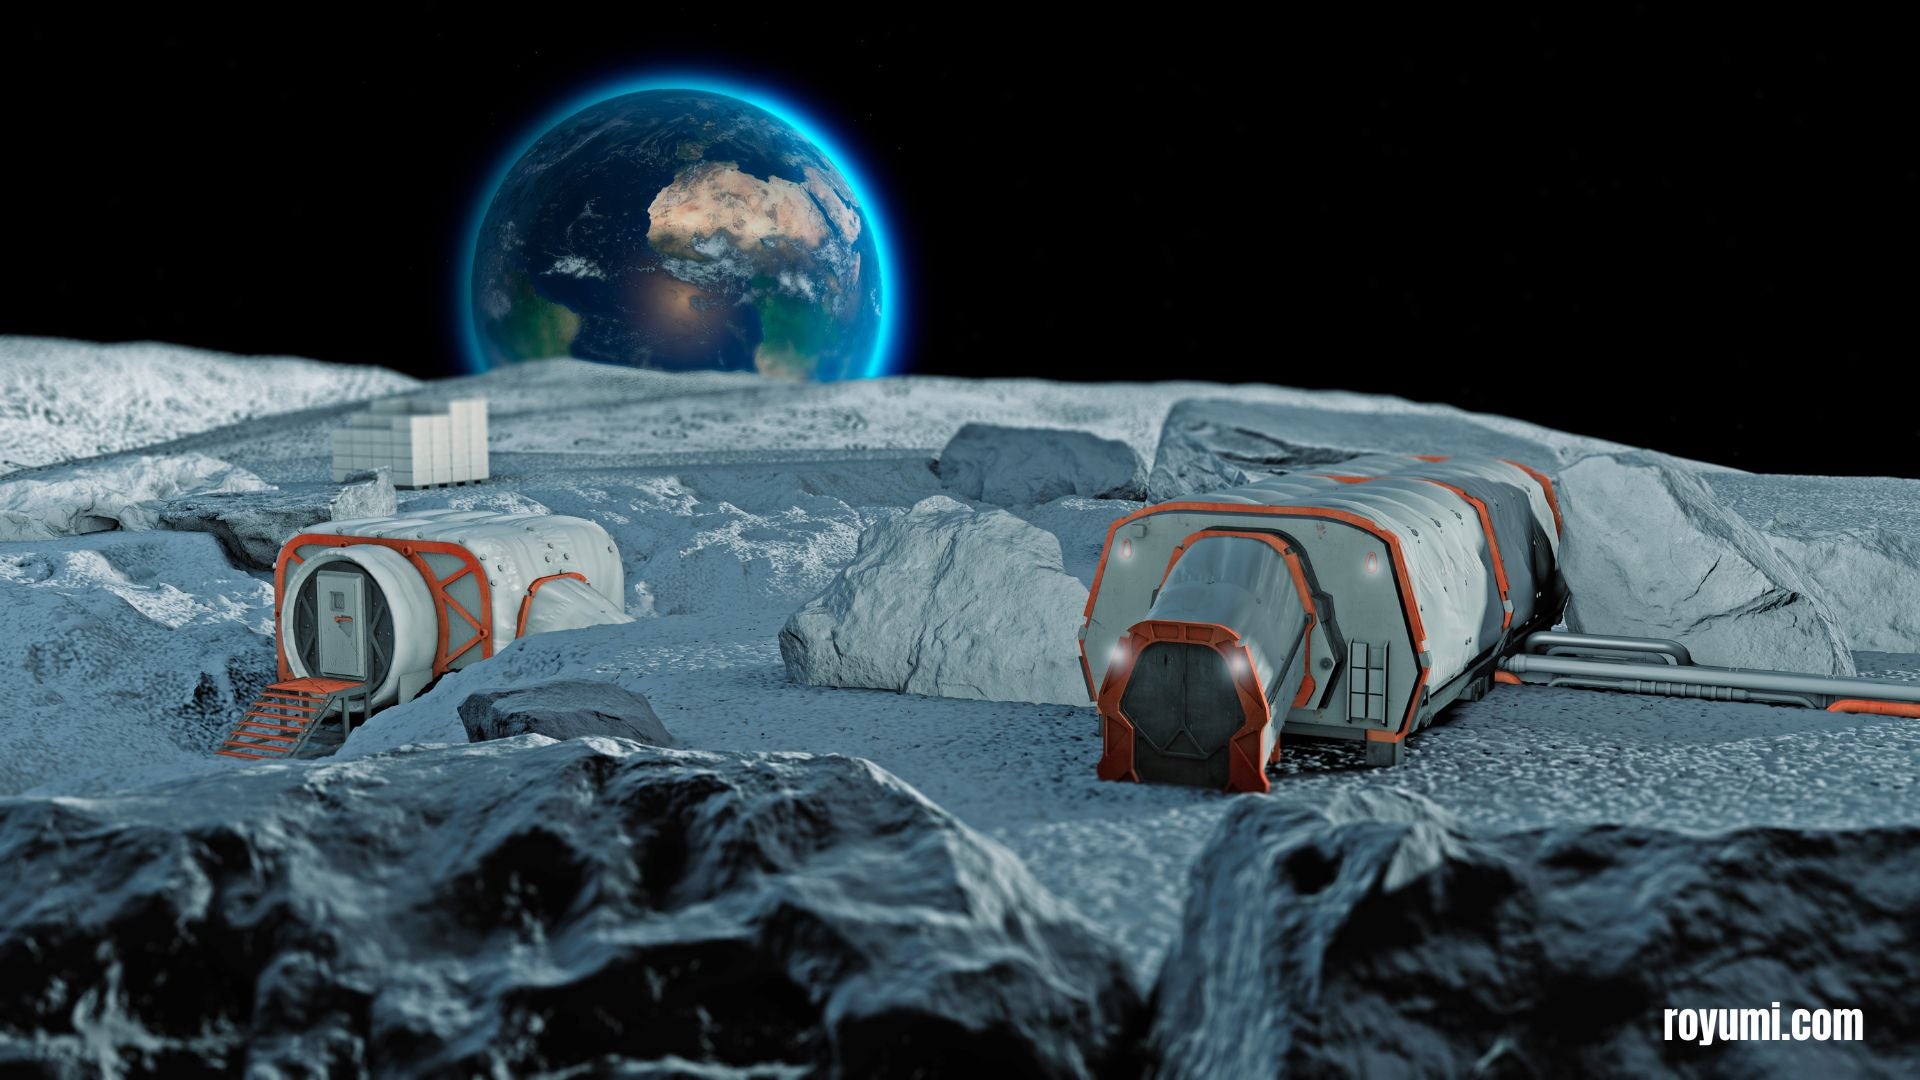 What it would be like to live on the Moon: Challenges of urban planning and architecture in a lunar environment